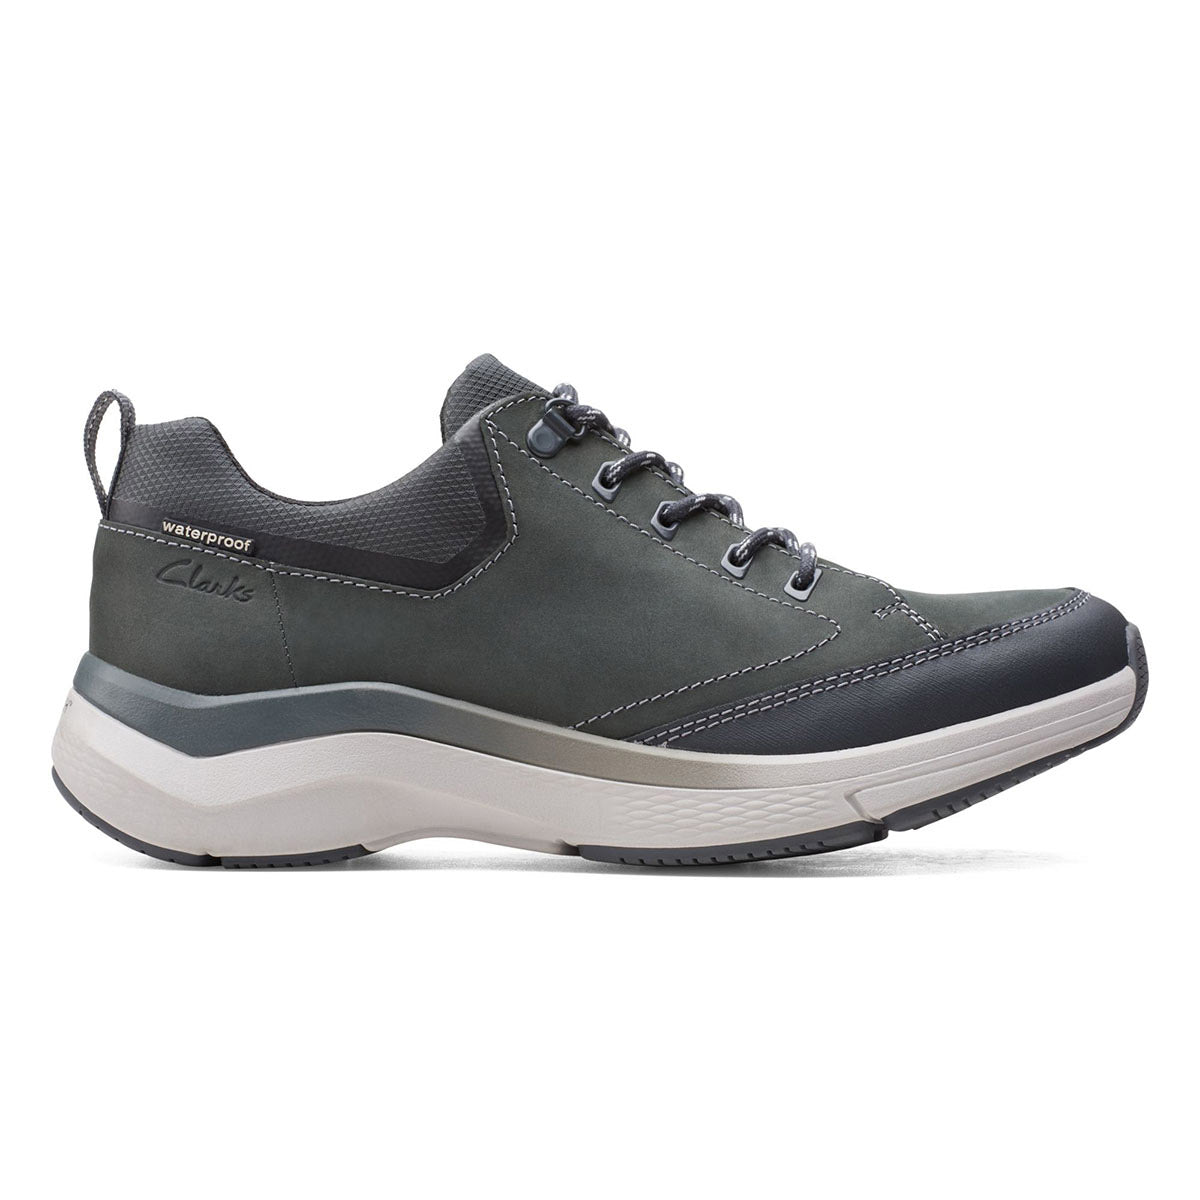 A single Clarks Wave 2.0 Vibe Grey - Mens waterproof casual walking shoe with premium leather uppers displayed against a white background.